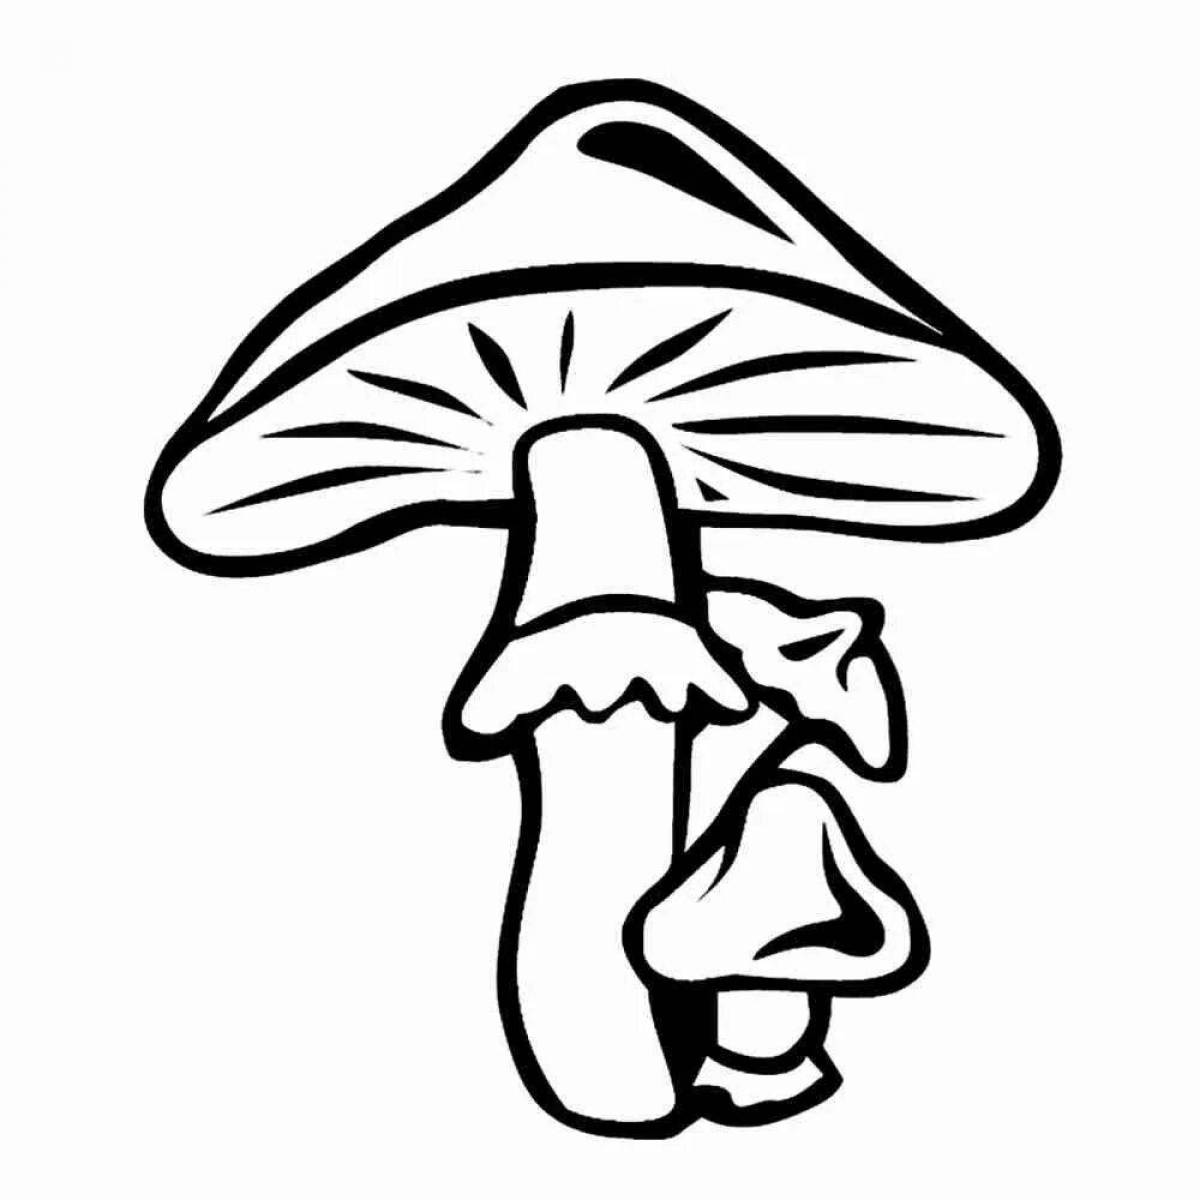 Adorable toadstool coloring page